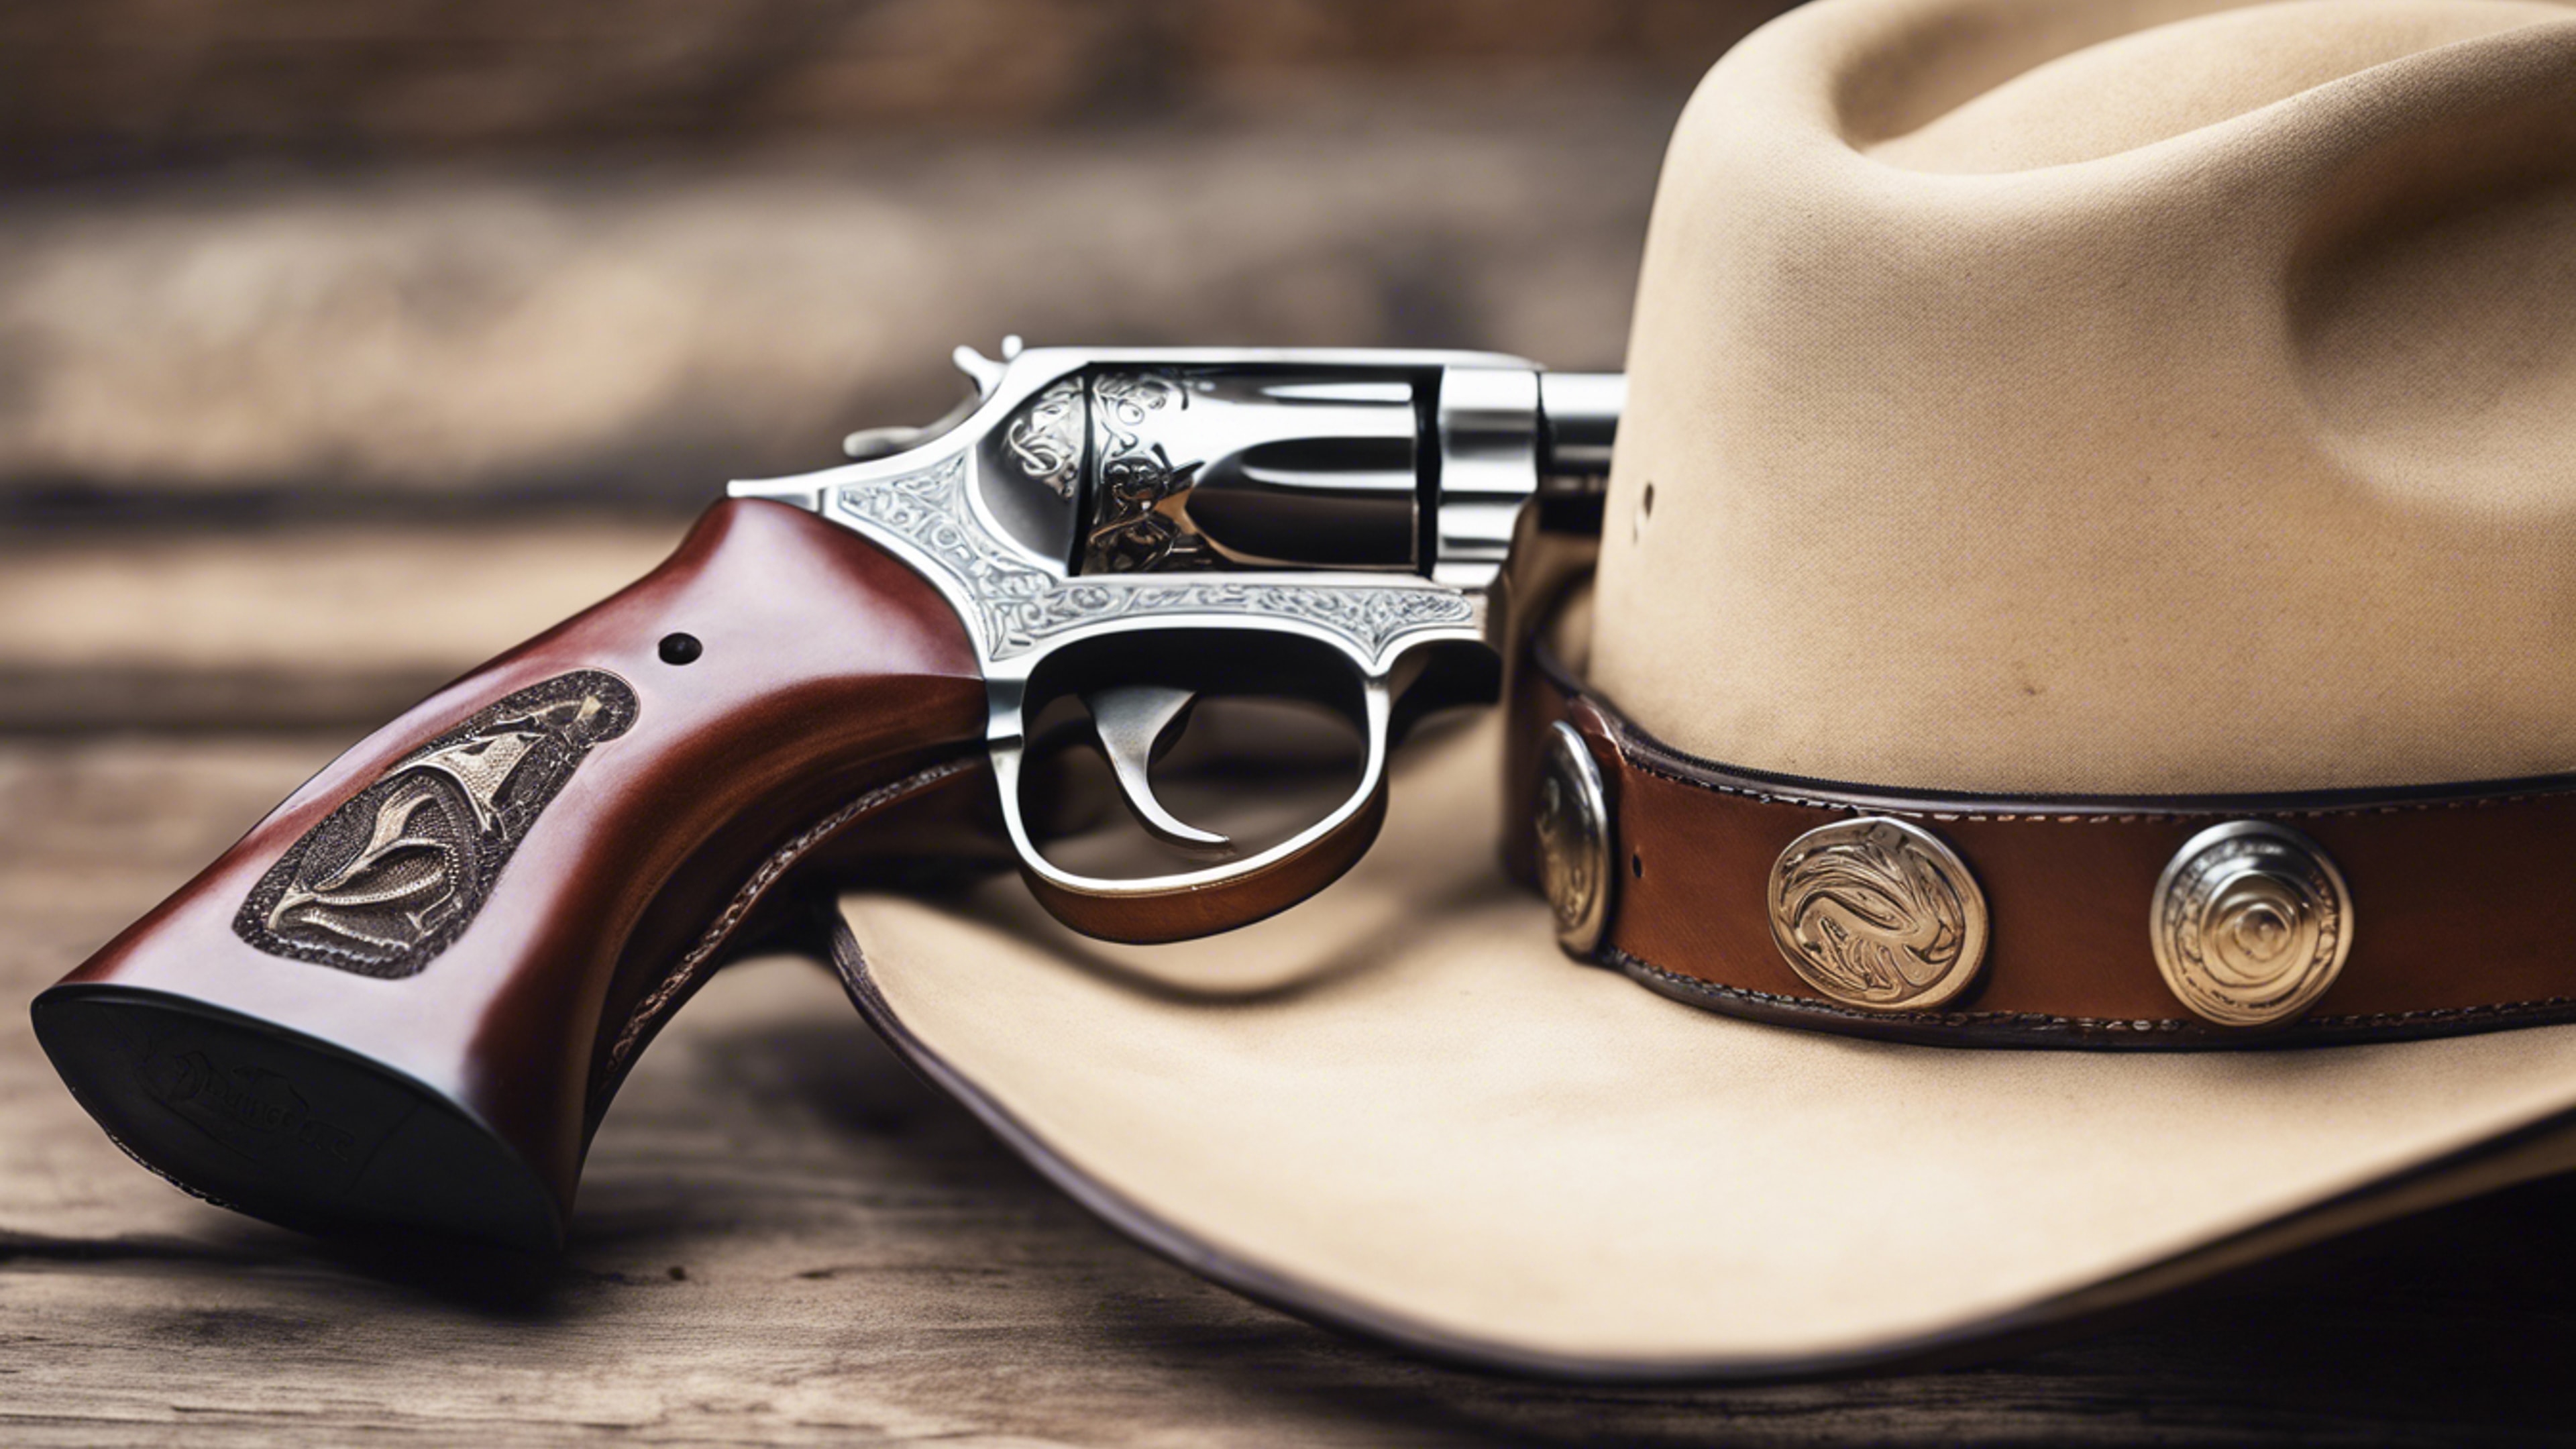 A detailed close-up of a cowboy hat, spurs, and a leather holster with a revolver. Tapeta[6dbcb72083d24ad78673]